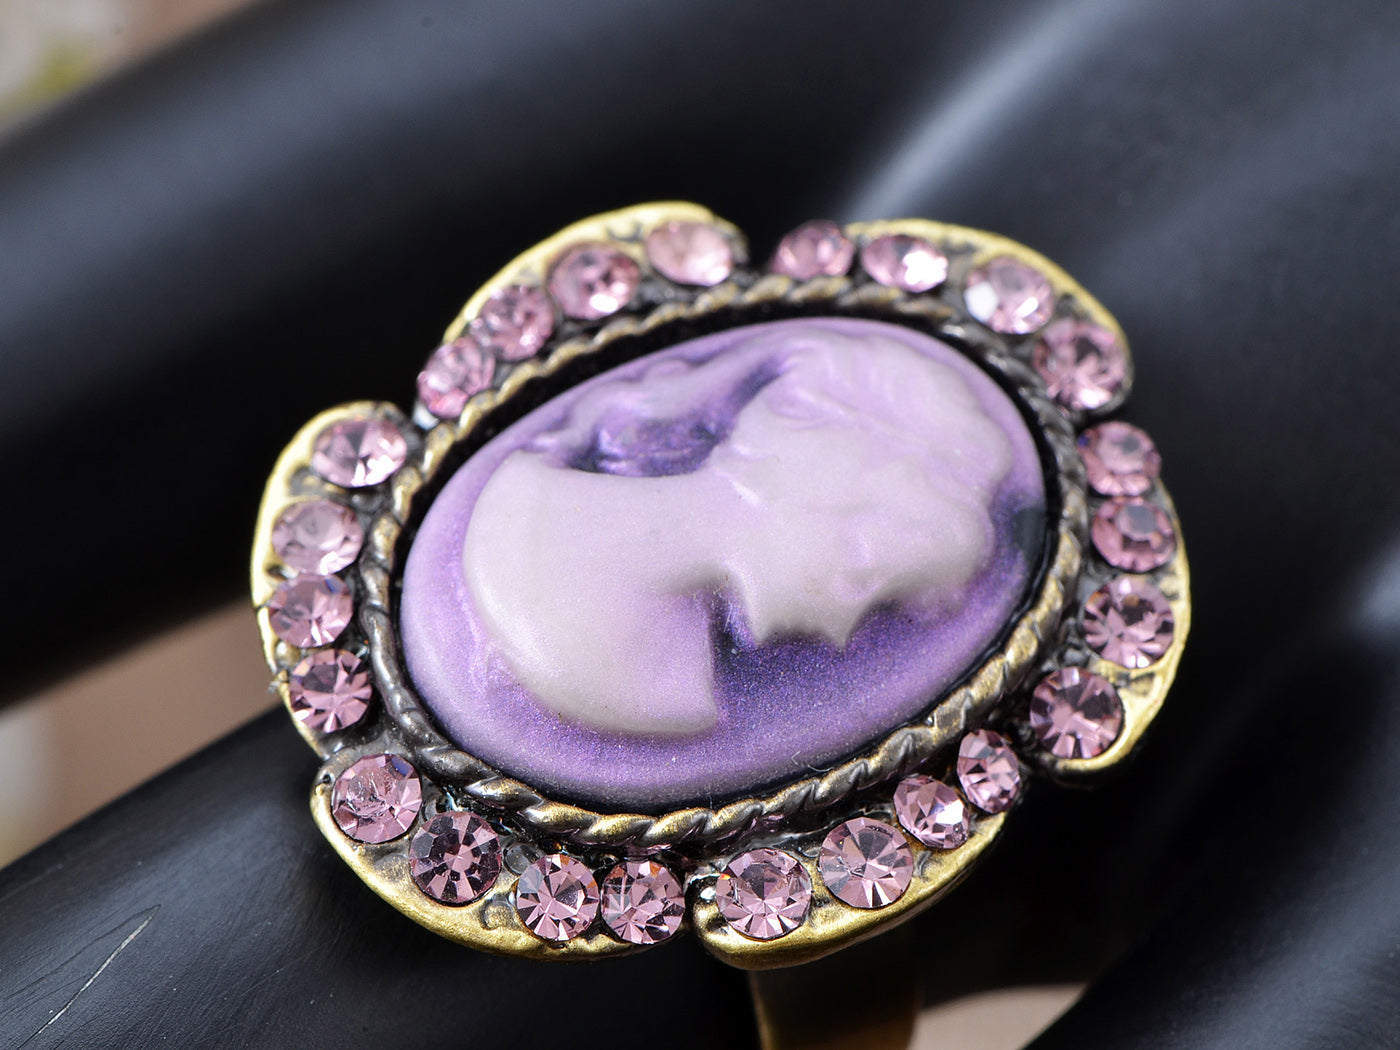 Cameo Light Floral Shaped Amethyst Ring